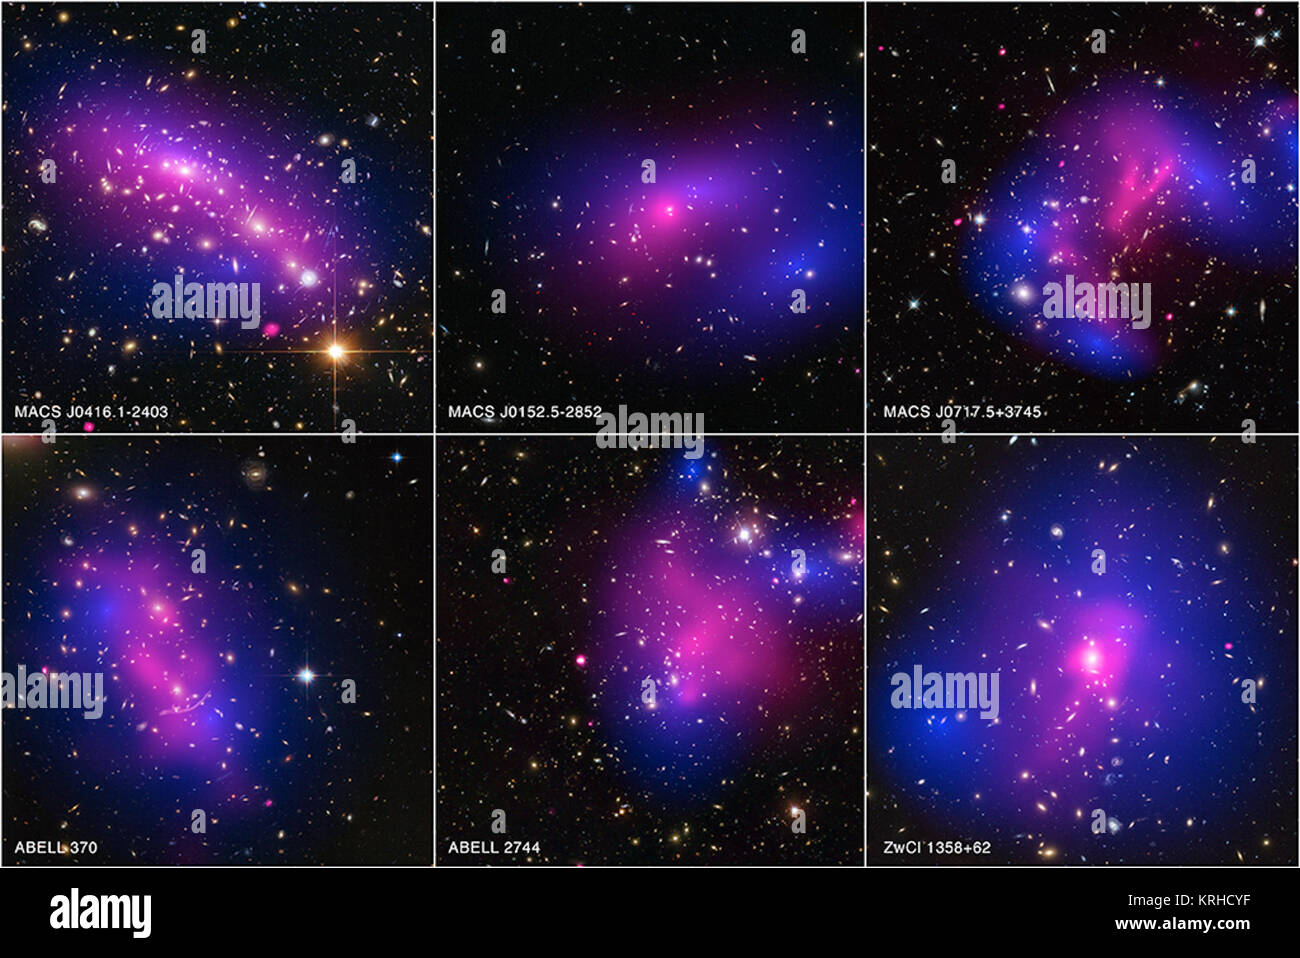 These galaxy clusters are part of a large study using Chandra and Hubble that sets new limits on how dark matter - the mysterious substance that makes up most of the matter in the Universe - interacts with itself. The hot gas that envelopes the clusters glows brightly in X-rays detected by Chandra (pink). When combined with Hubble's visible light data, astronomers can map where the stars and hot gas are after the collision, as well as the inferred distribution of dark matter (blue) through the effect of gravitational lensing. Chandra Six Galaxy Cluster (X-rays) Stock Photo